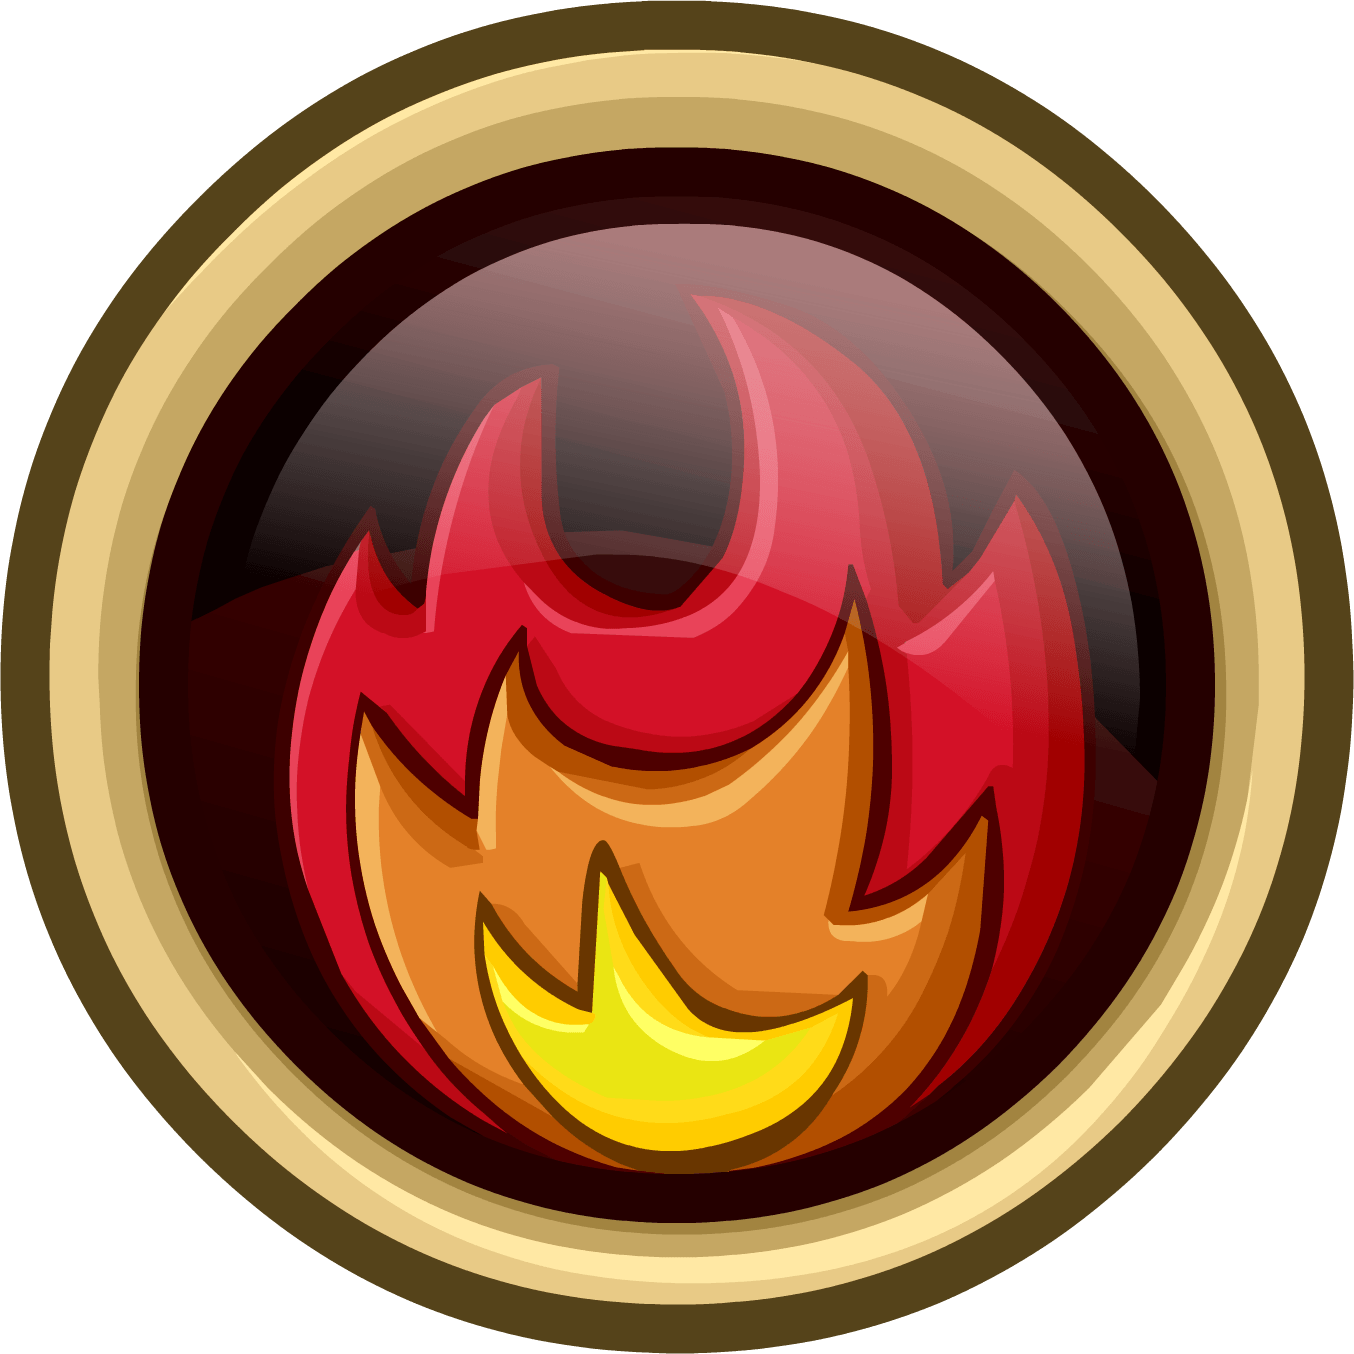 Fire Element Logo - Image - Fire Element Logo.png | Forestpedia Wiki | FANDOM powered by ...